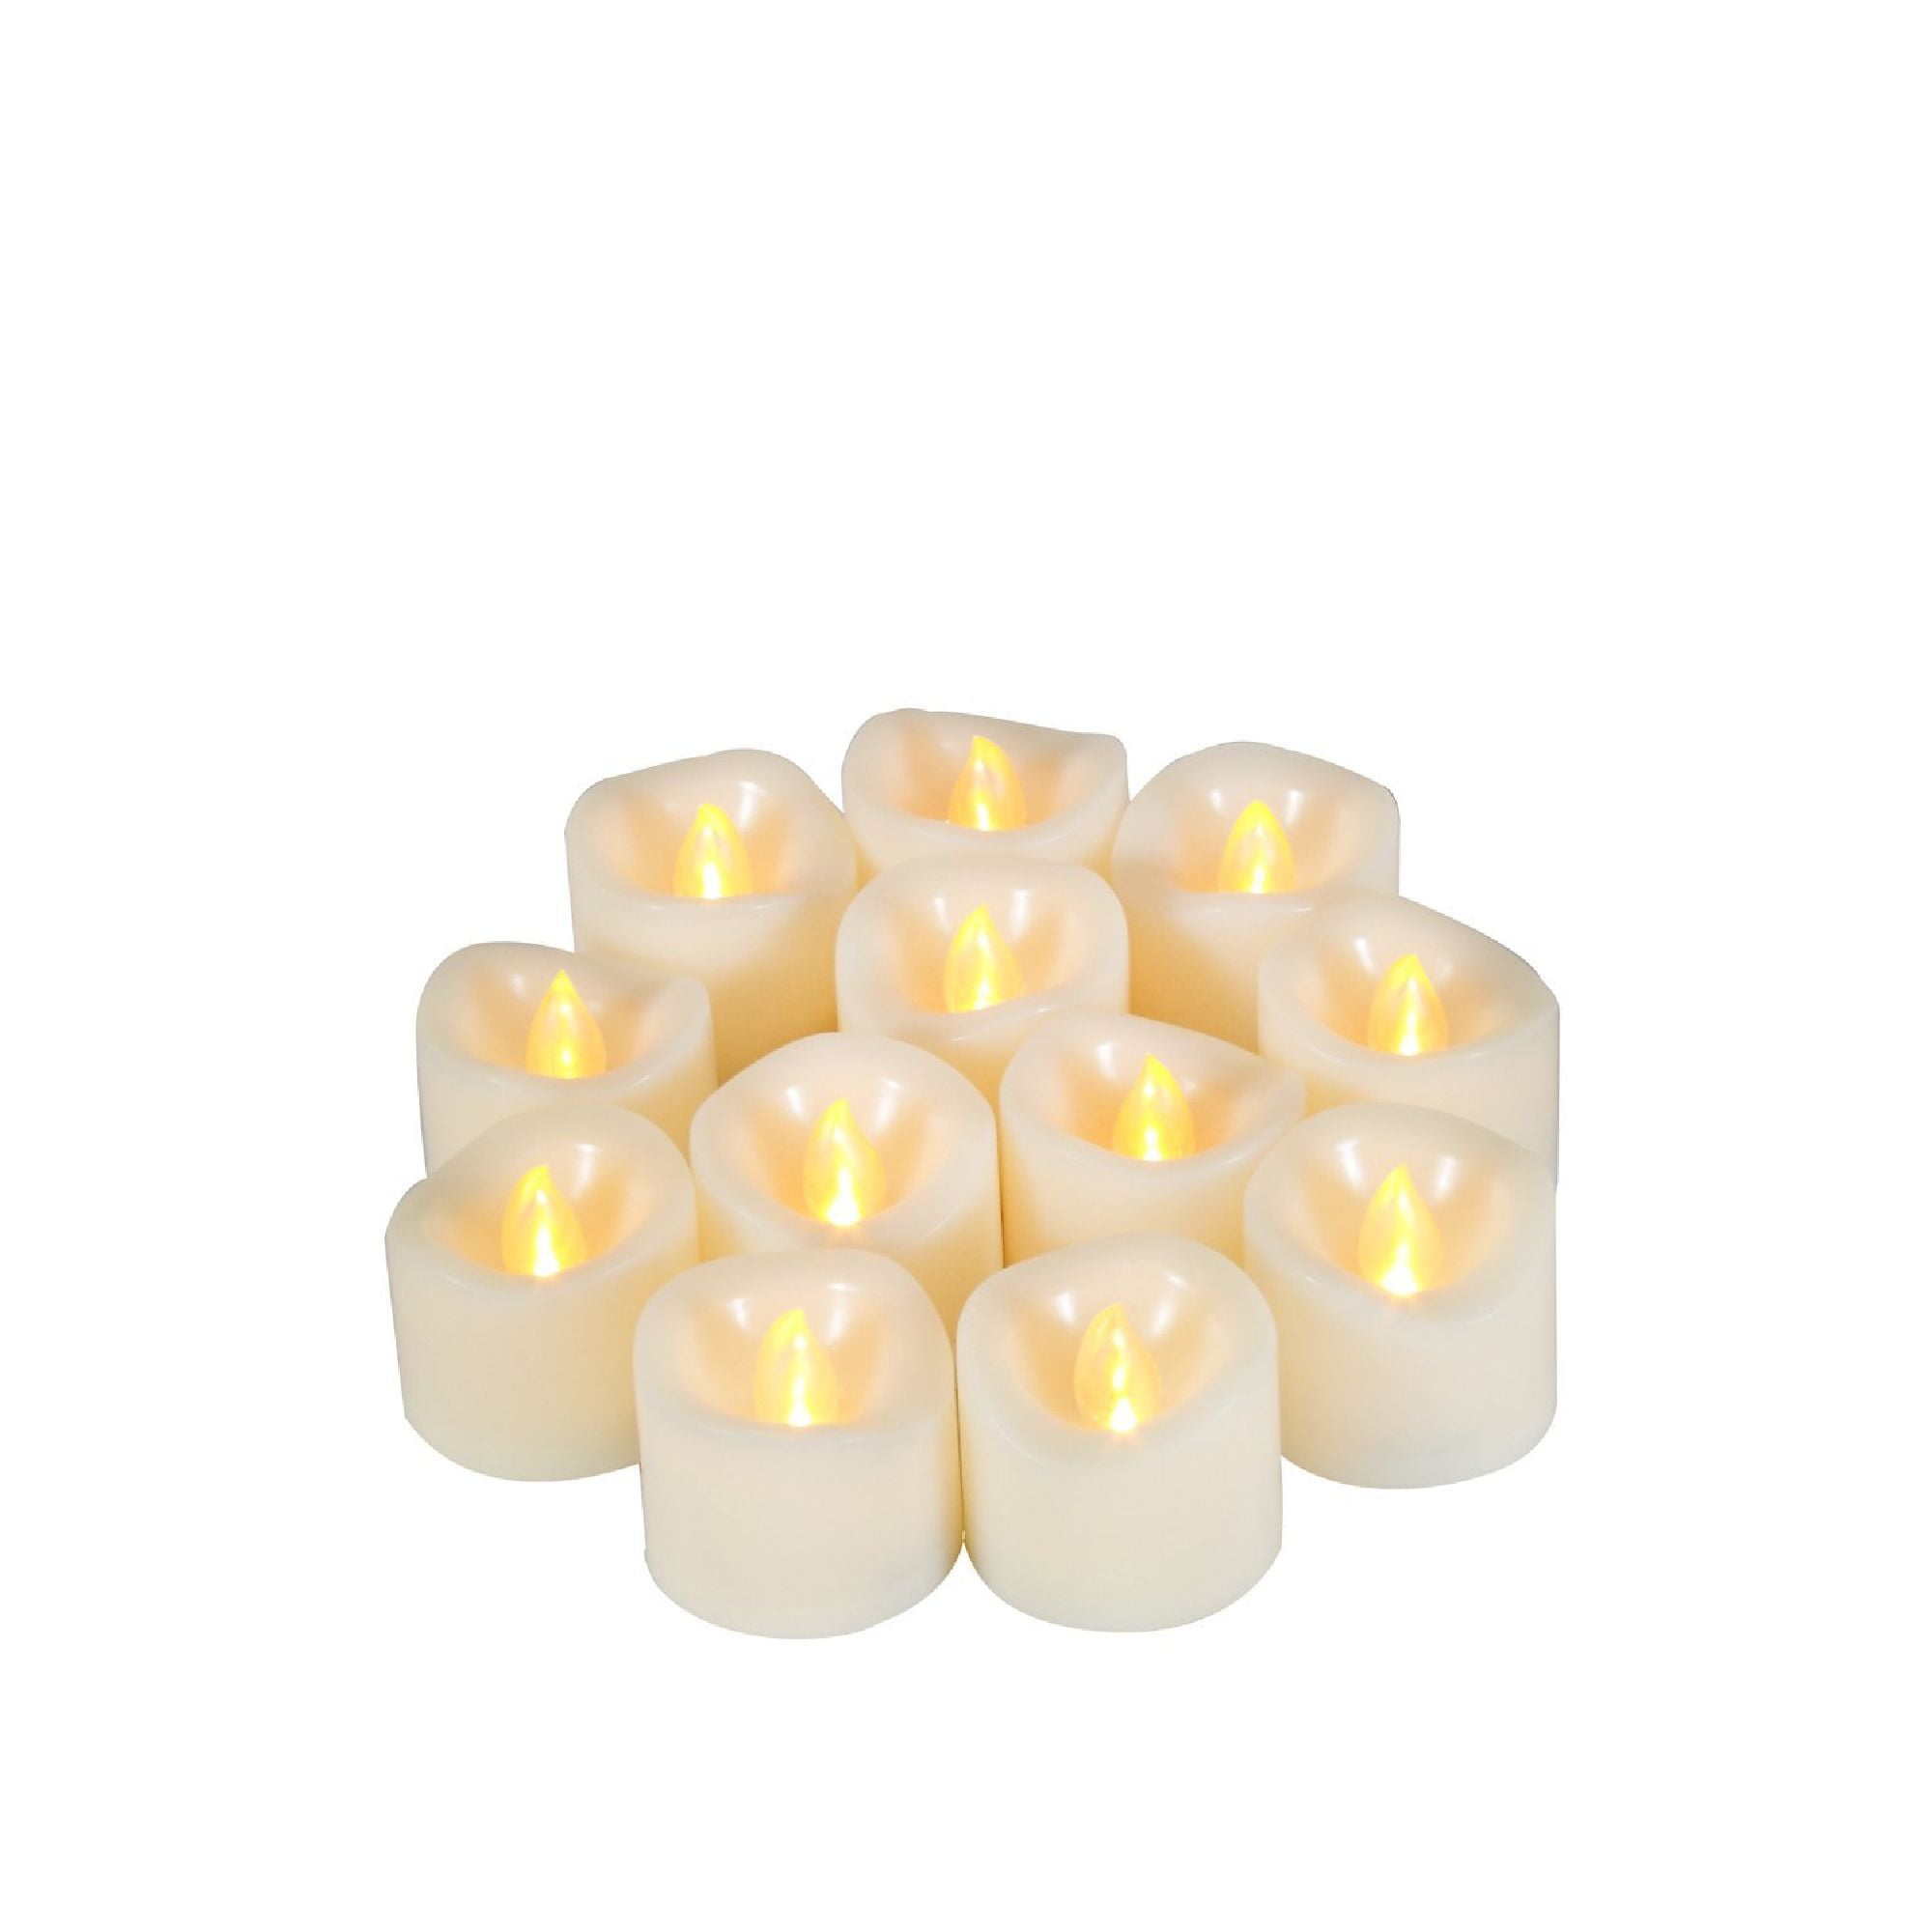 12pcs Battery candles flicker with timer Flameless Tealight Candles Automatic Votives for Wedding Kitchen Home Window Decoration 